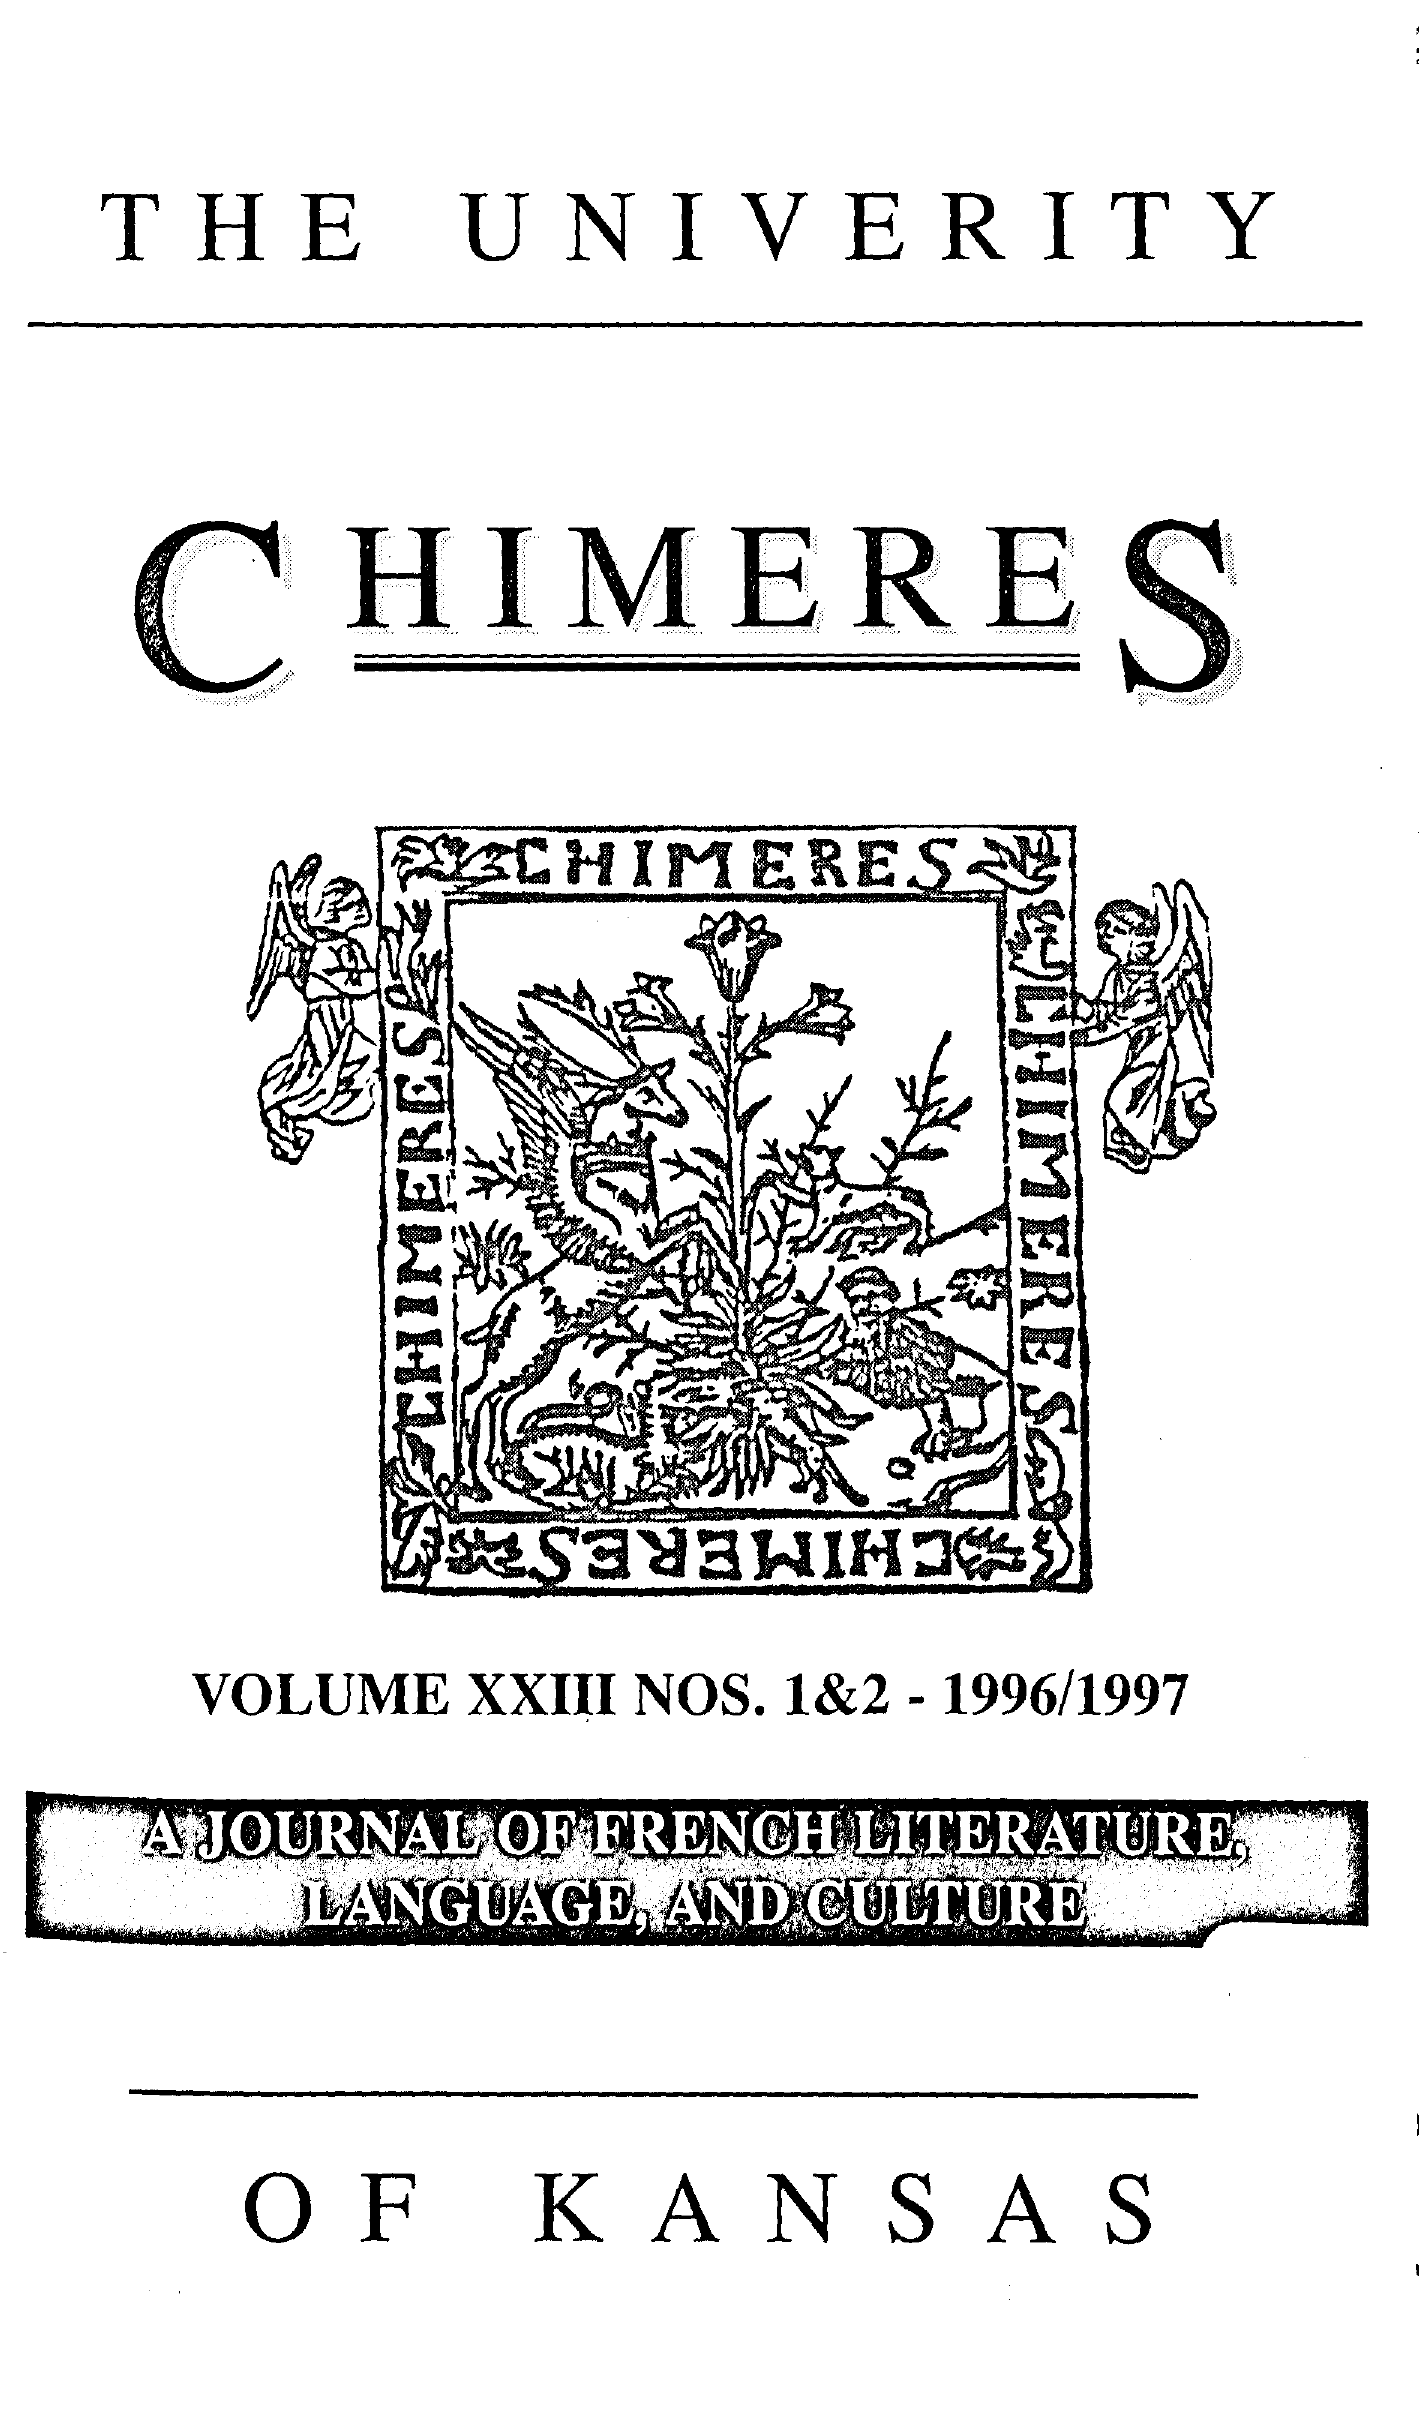 Cover for Chimères, Vol. 23.1-2, 1996/1997